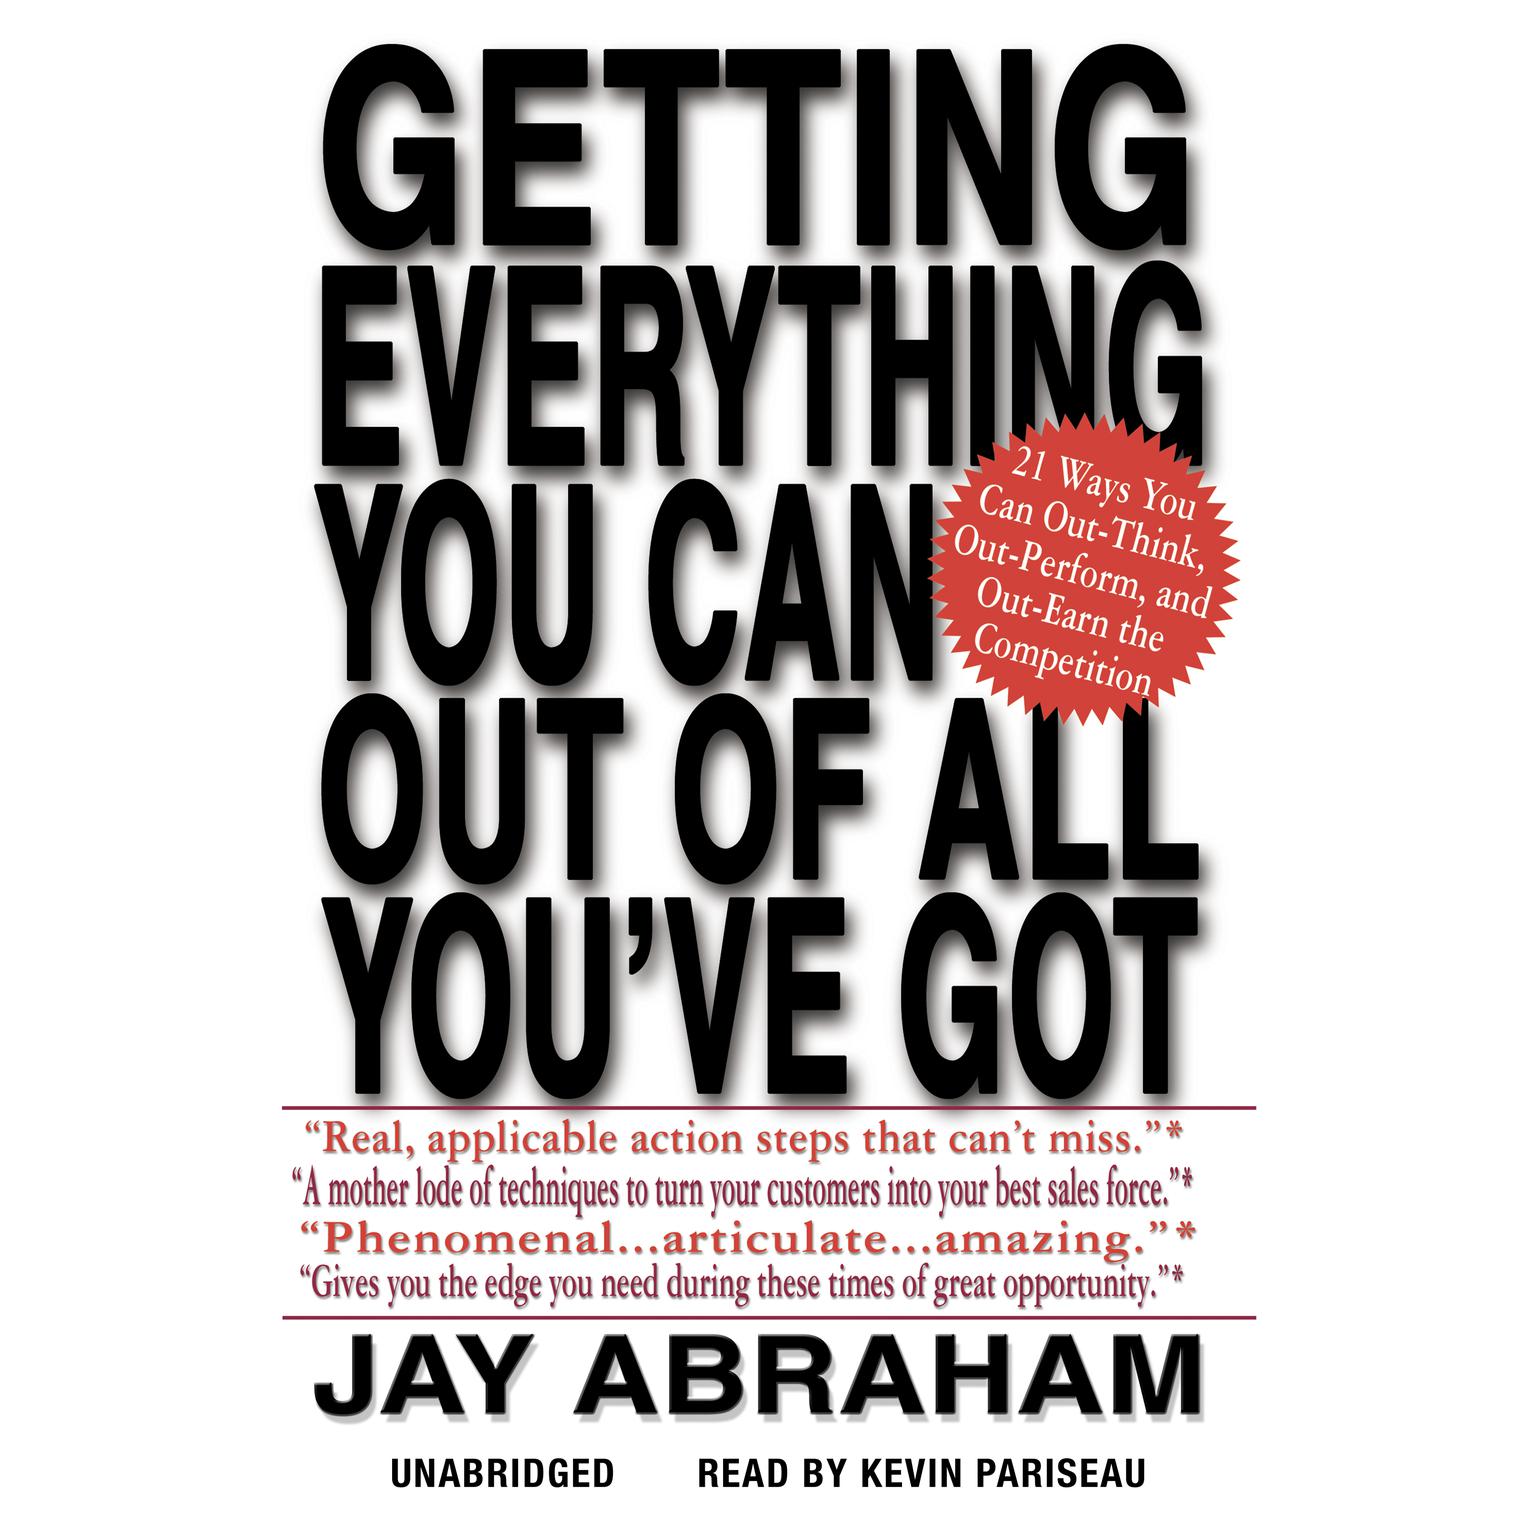 Getting Everything You Can Out of All Youve Got: 21 Ways You Can Out-Think, Out-Perform, and Out-Earn the Competition Audiobook, by Jay Abraham